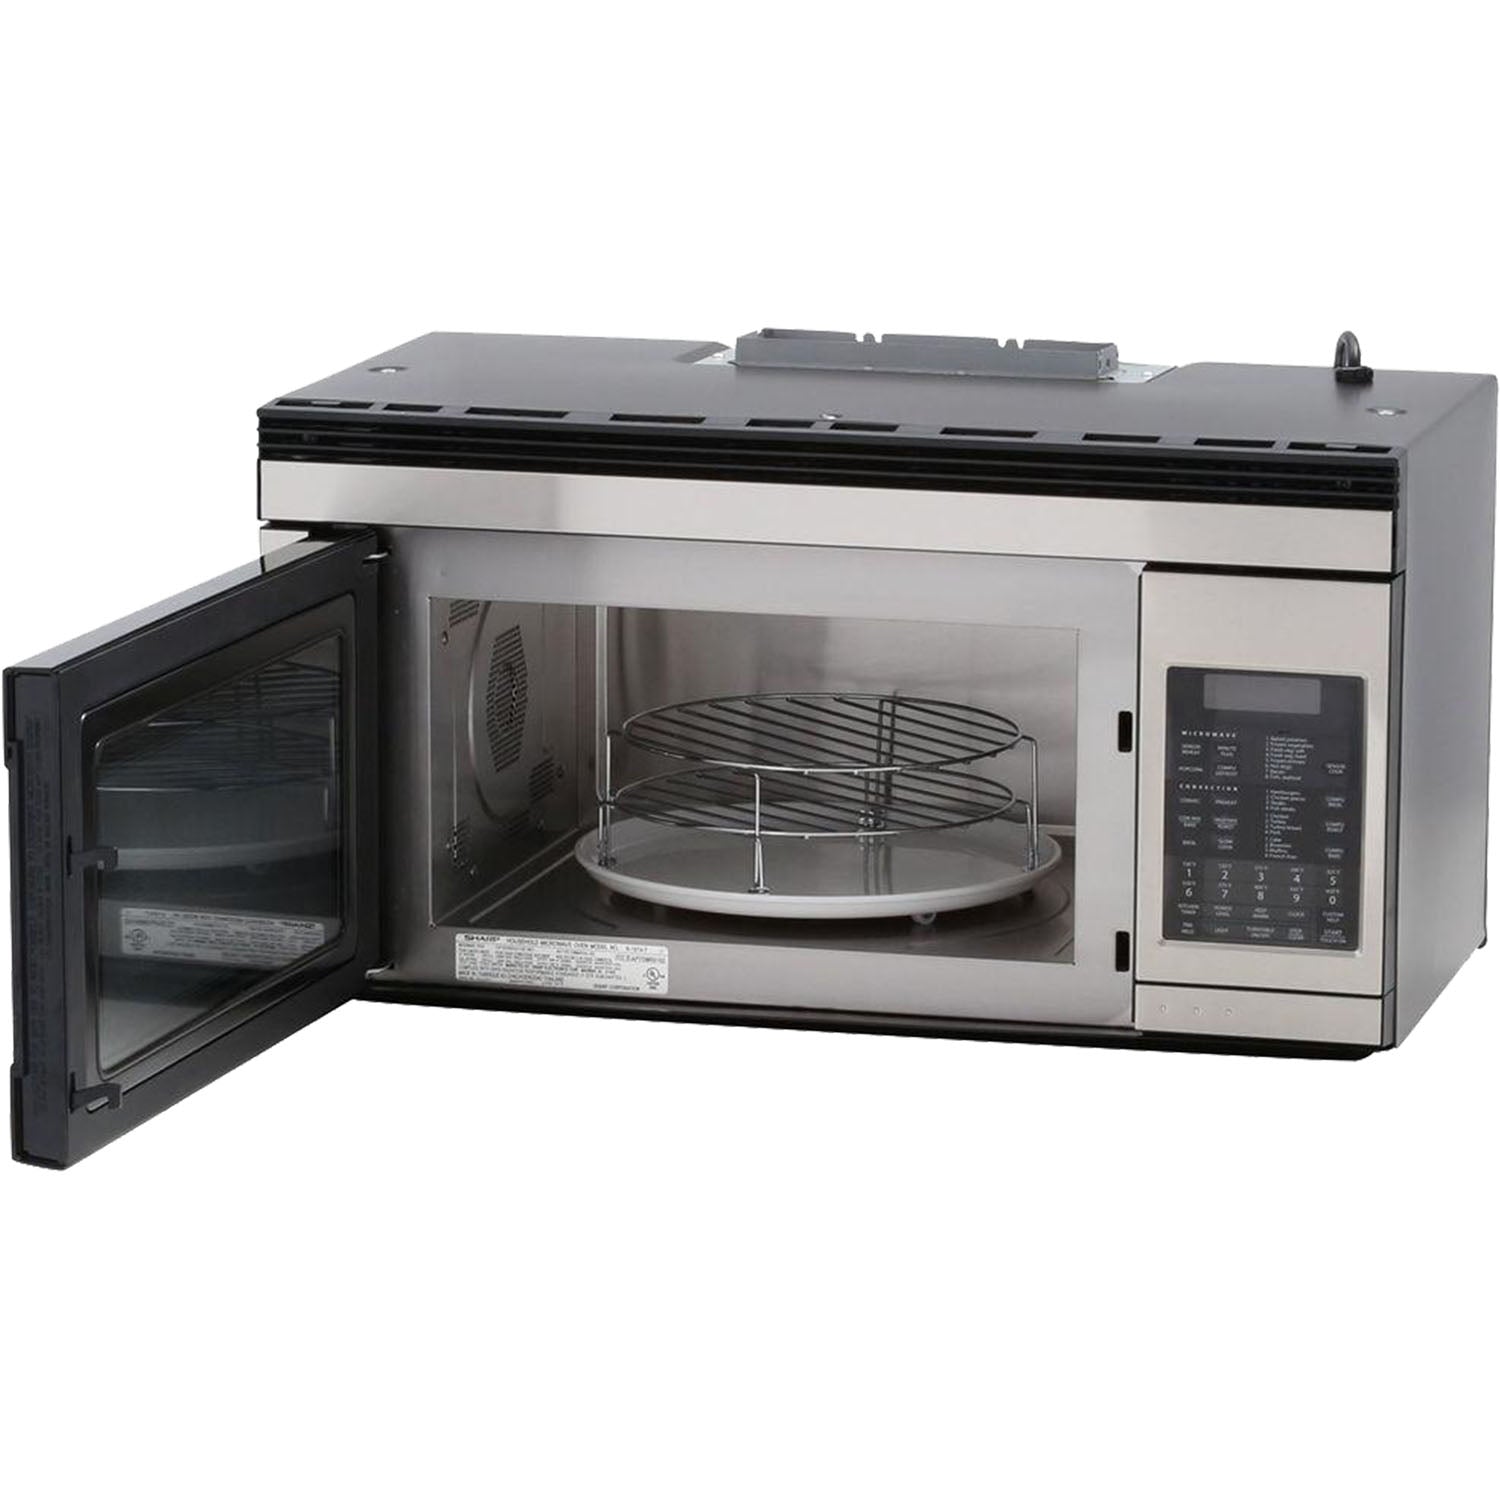 Sharp 1.1 cu. ft. 850W 30 in. Over-the-Range Convection Microwave Oven in Stainless Steel (R1881LSY)